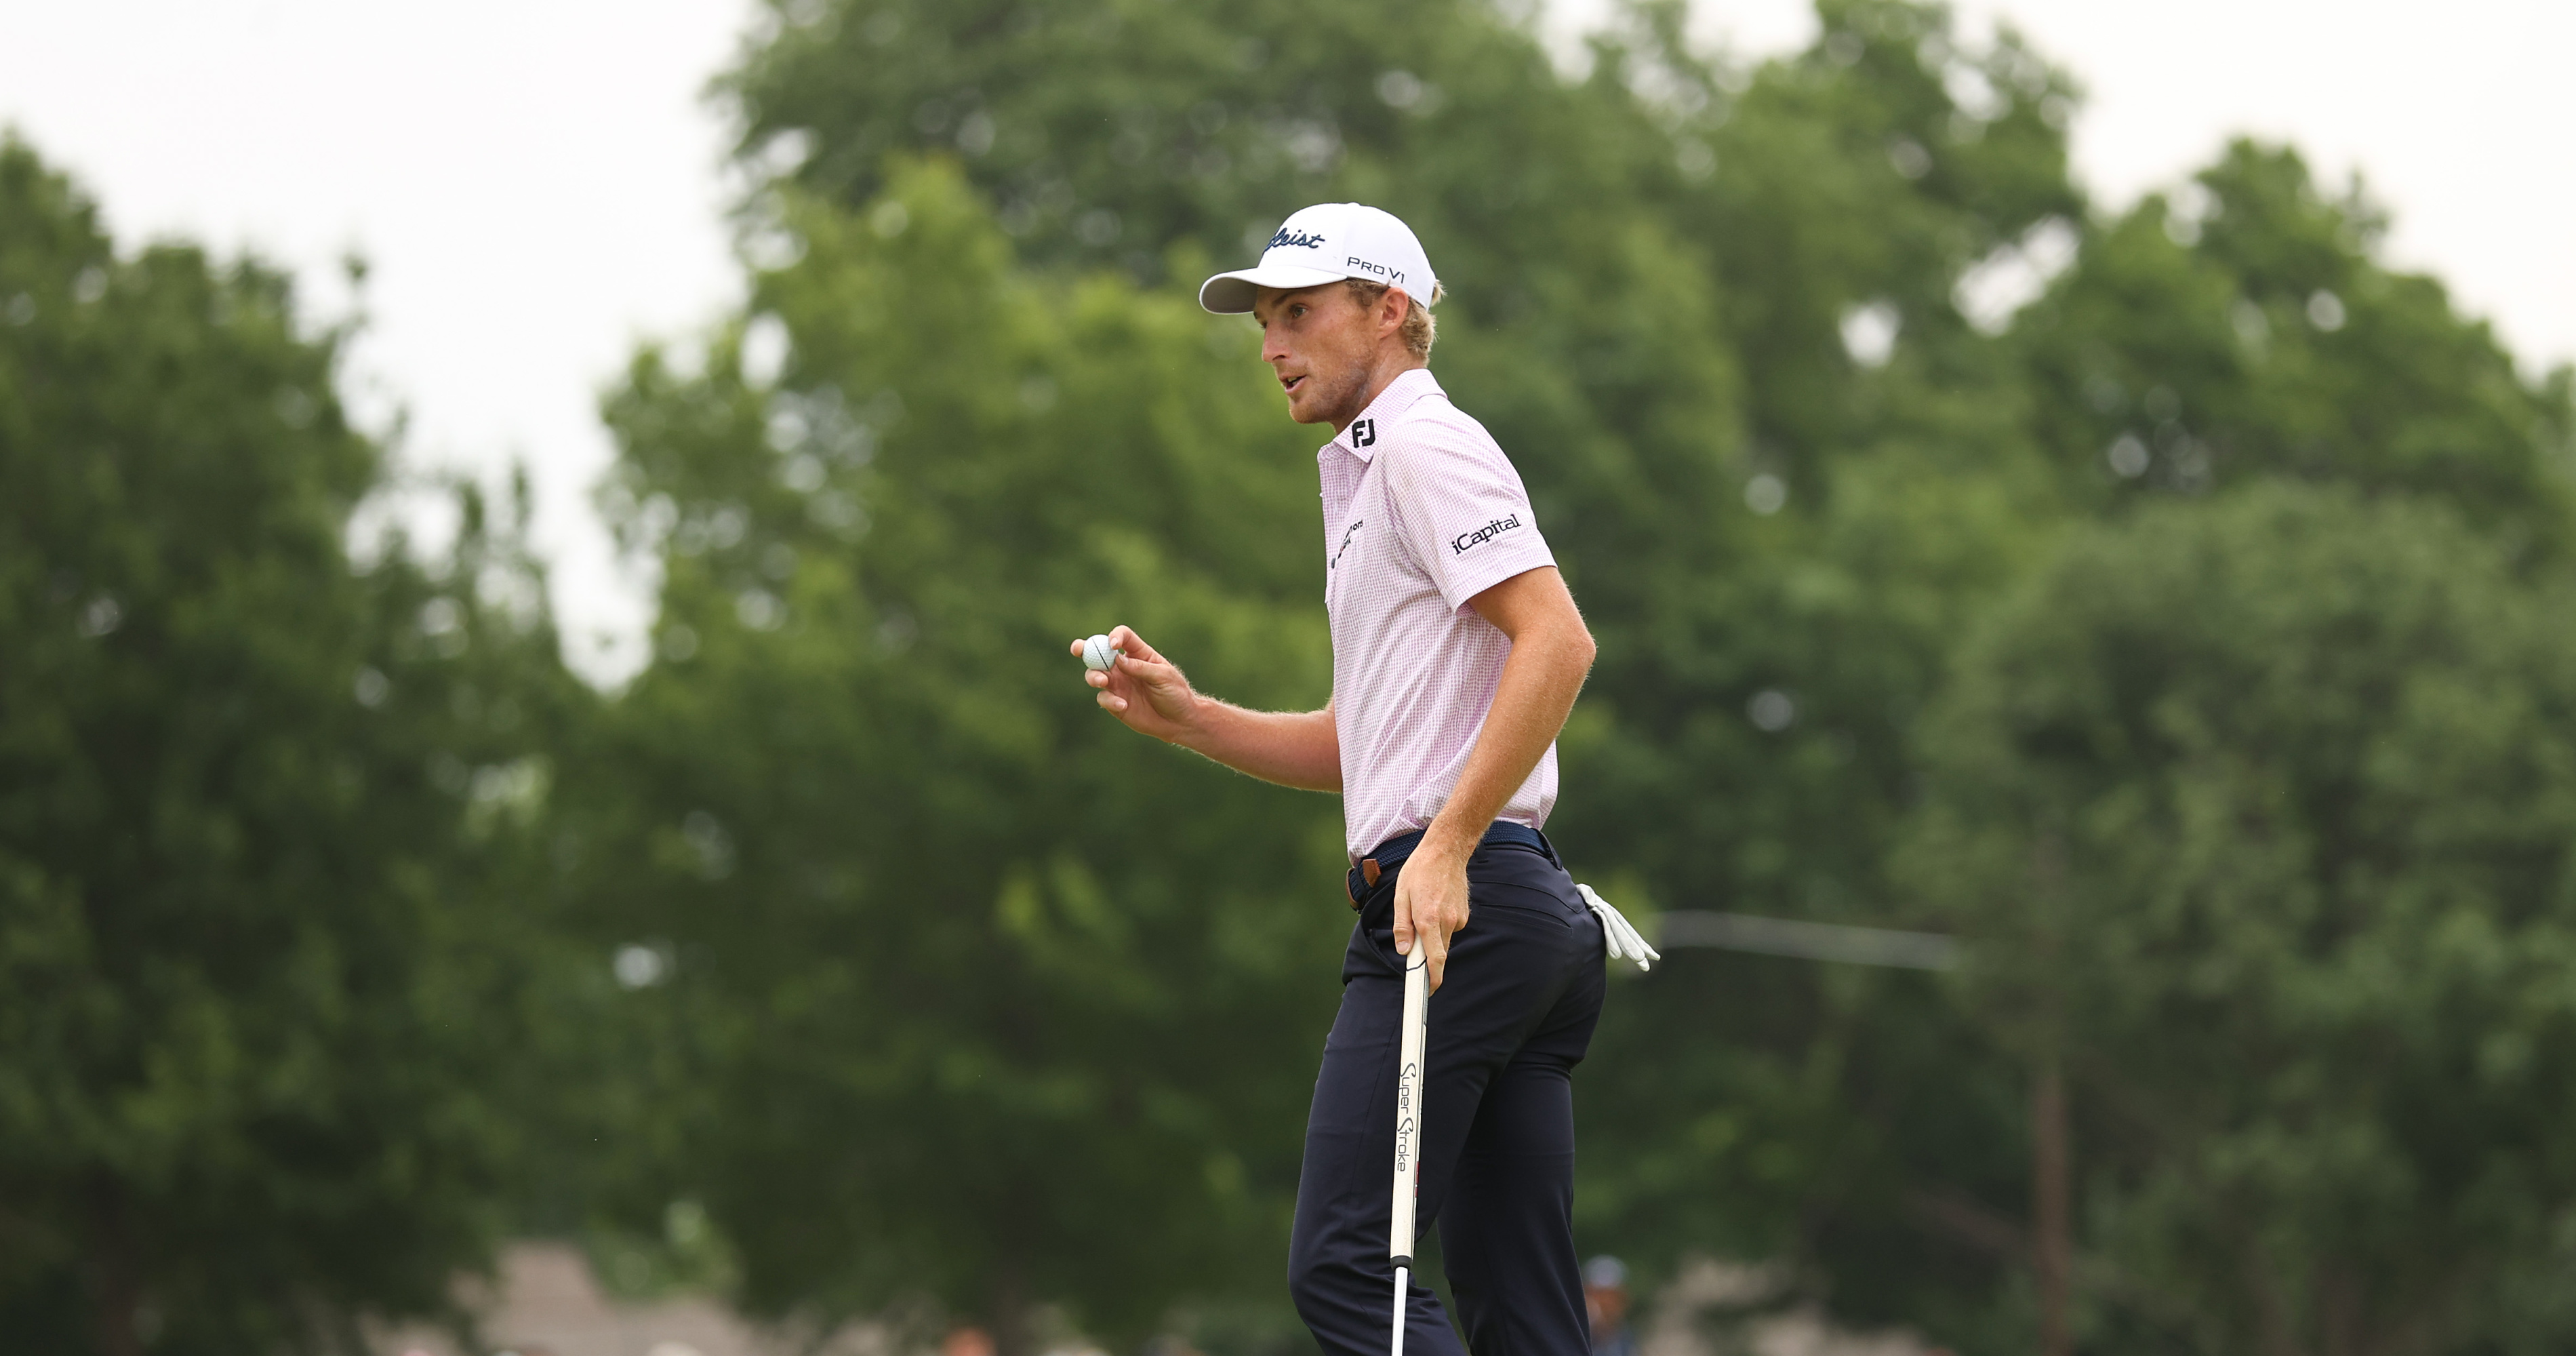 PGA Championship 2022 Leaderboard Scores, Highlights and Cut Line from